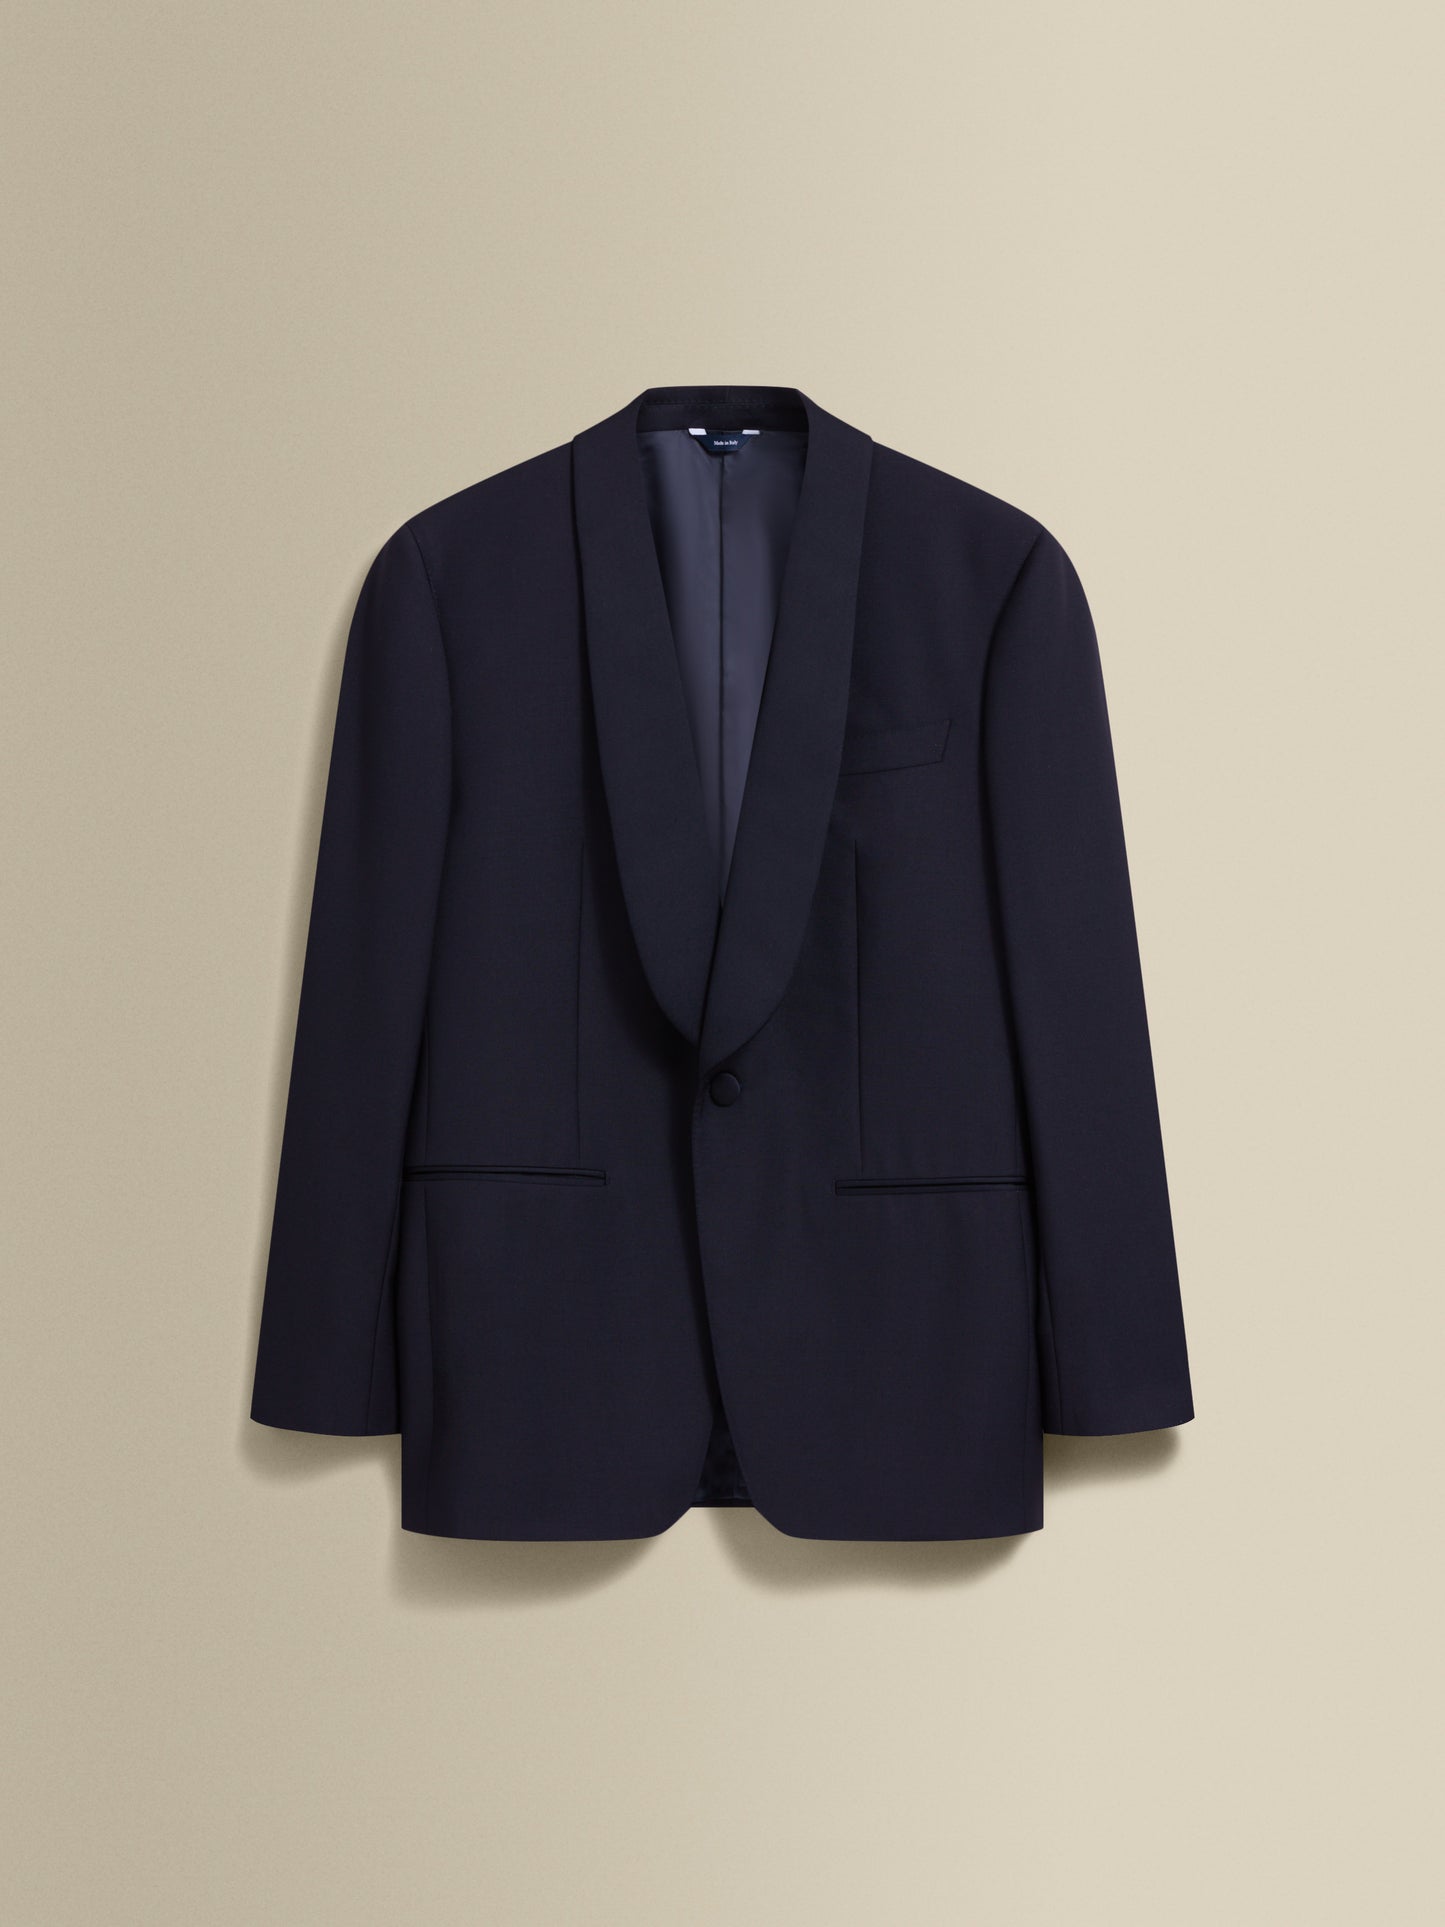 Shawl Lapel Dinner Suit Midnight Navy Product Front